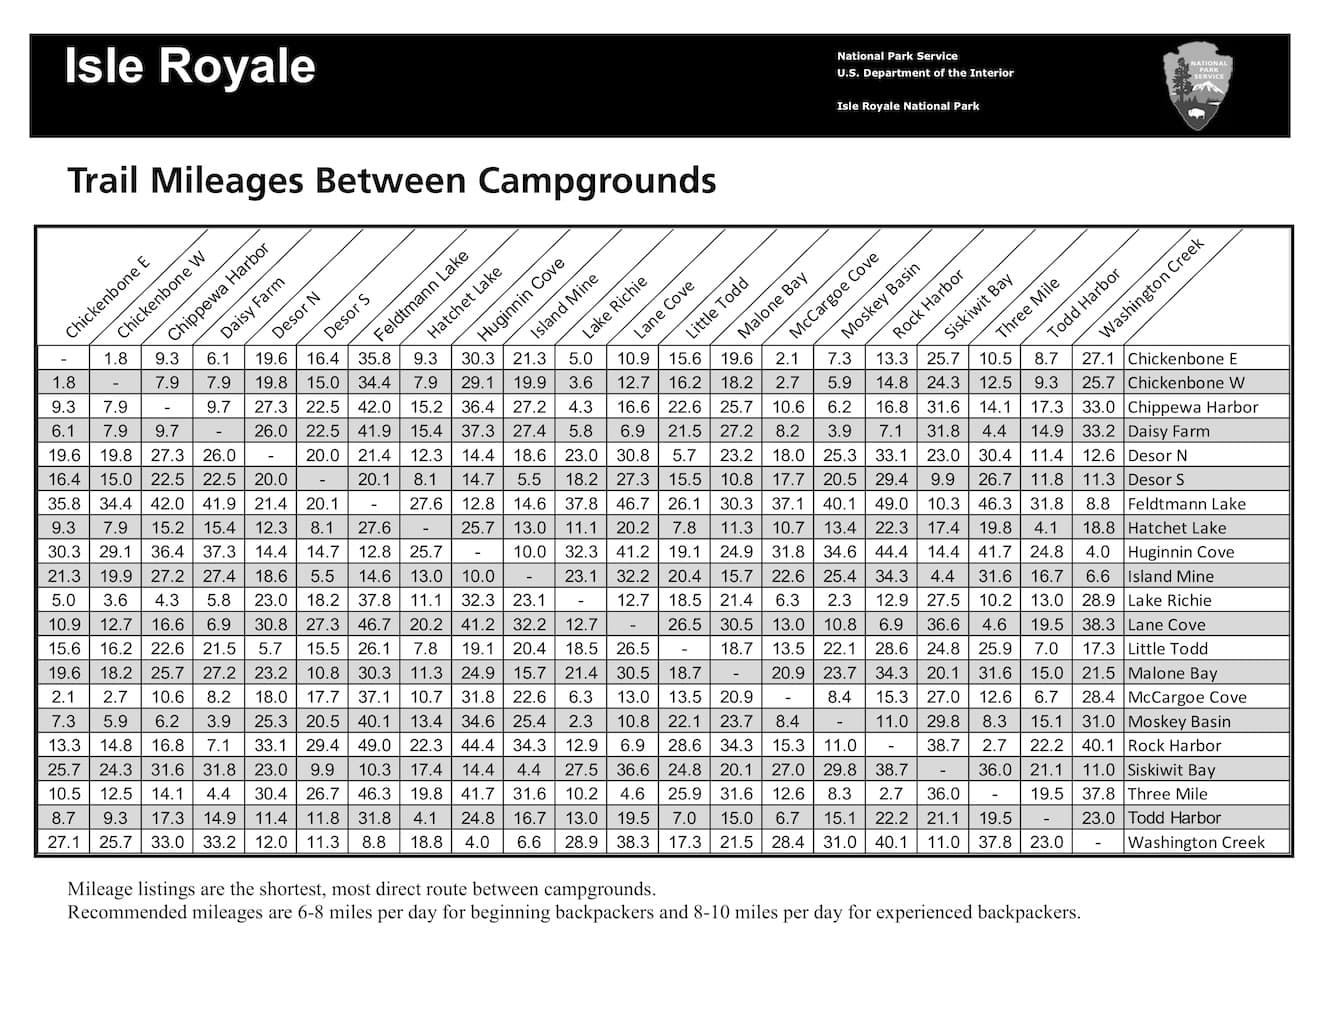 Preview image for Trail Mileages Between Campgrounds resource